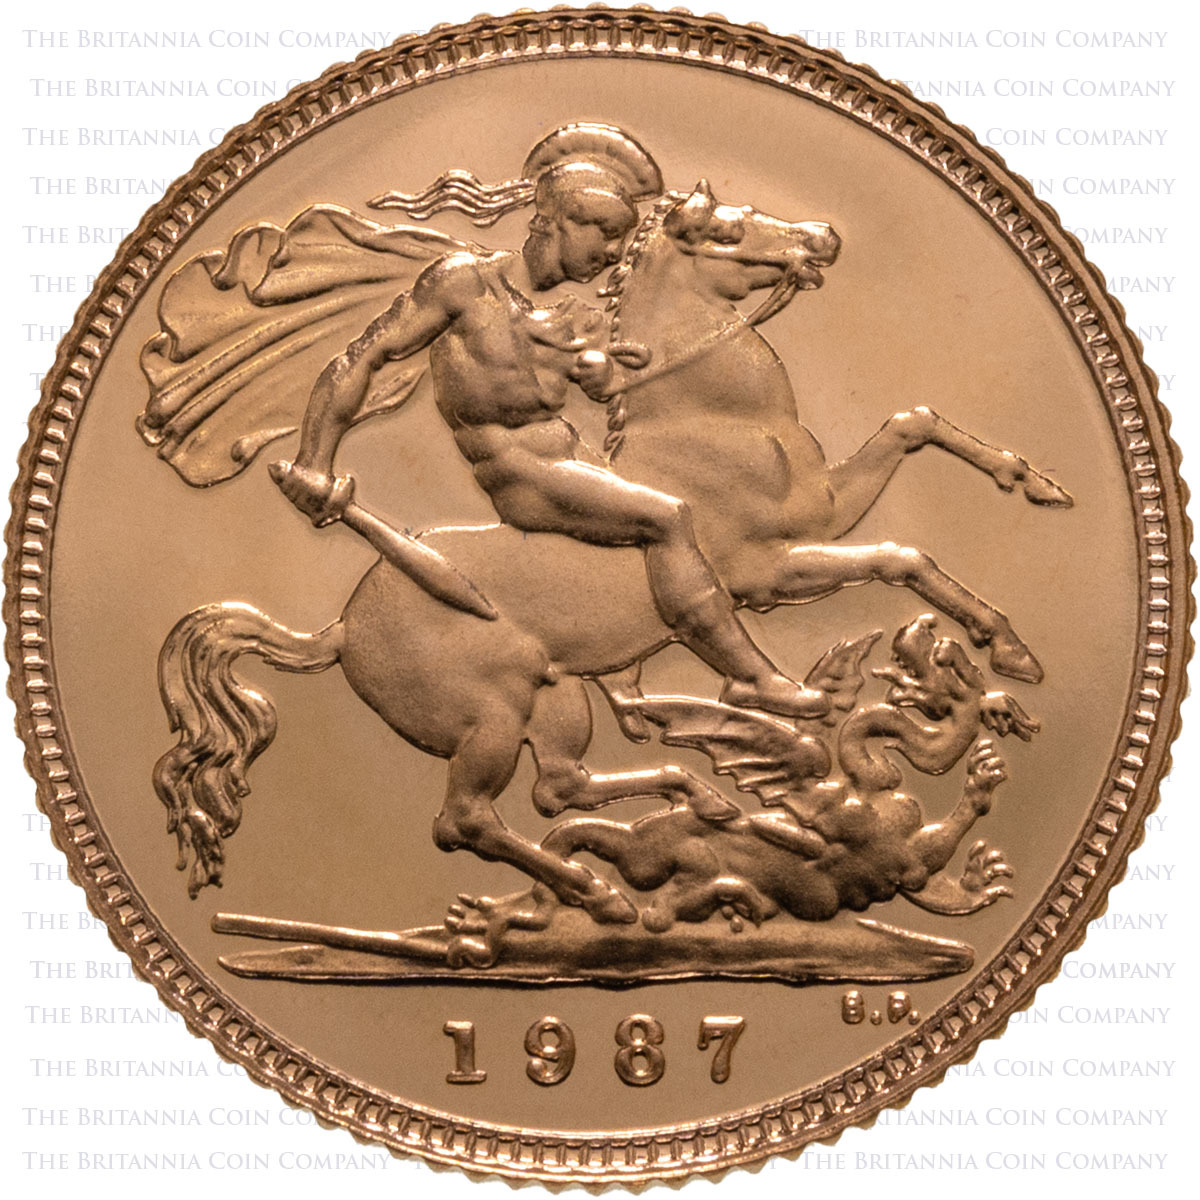 1987 Gold Proof Half Sovereign Coin Reverse